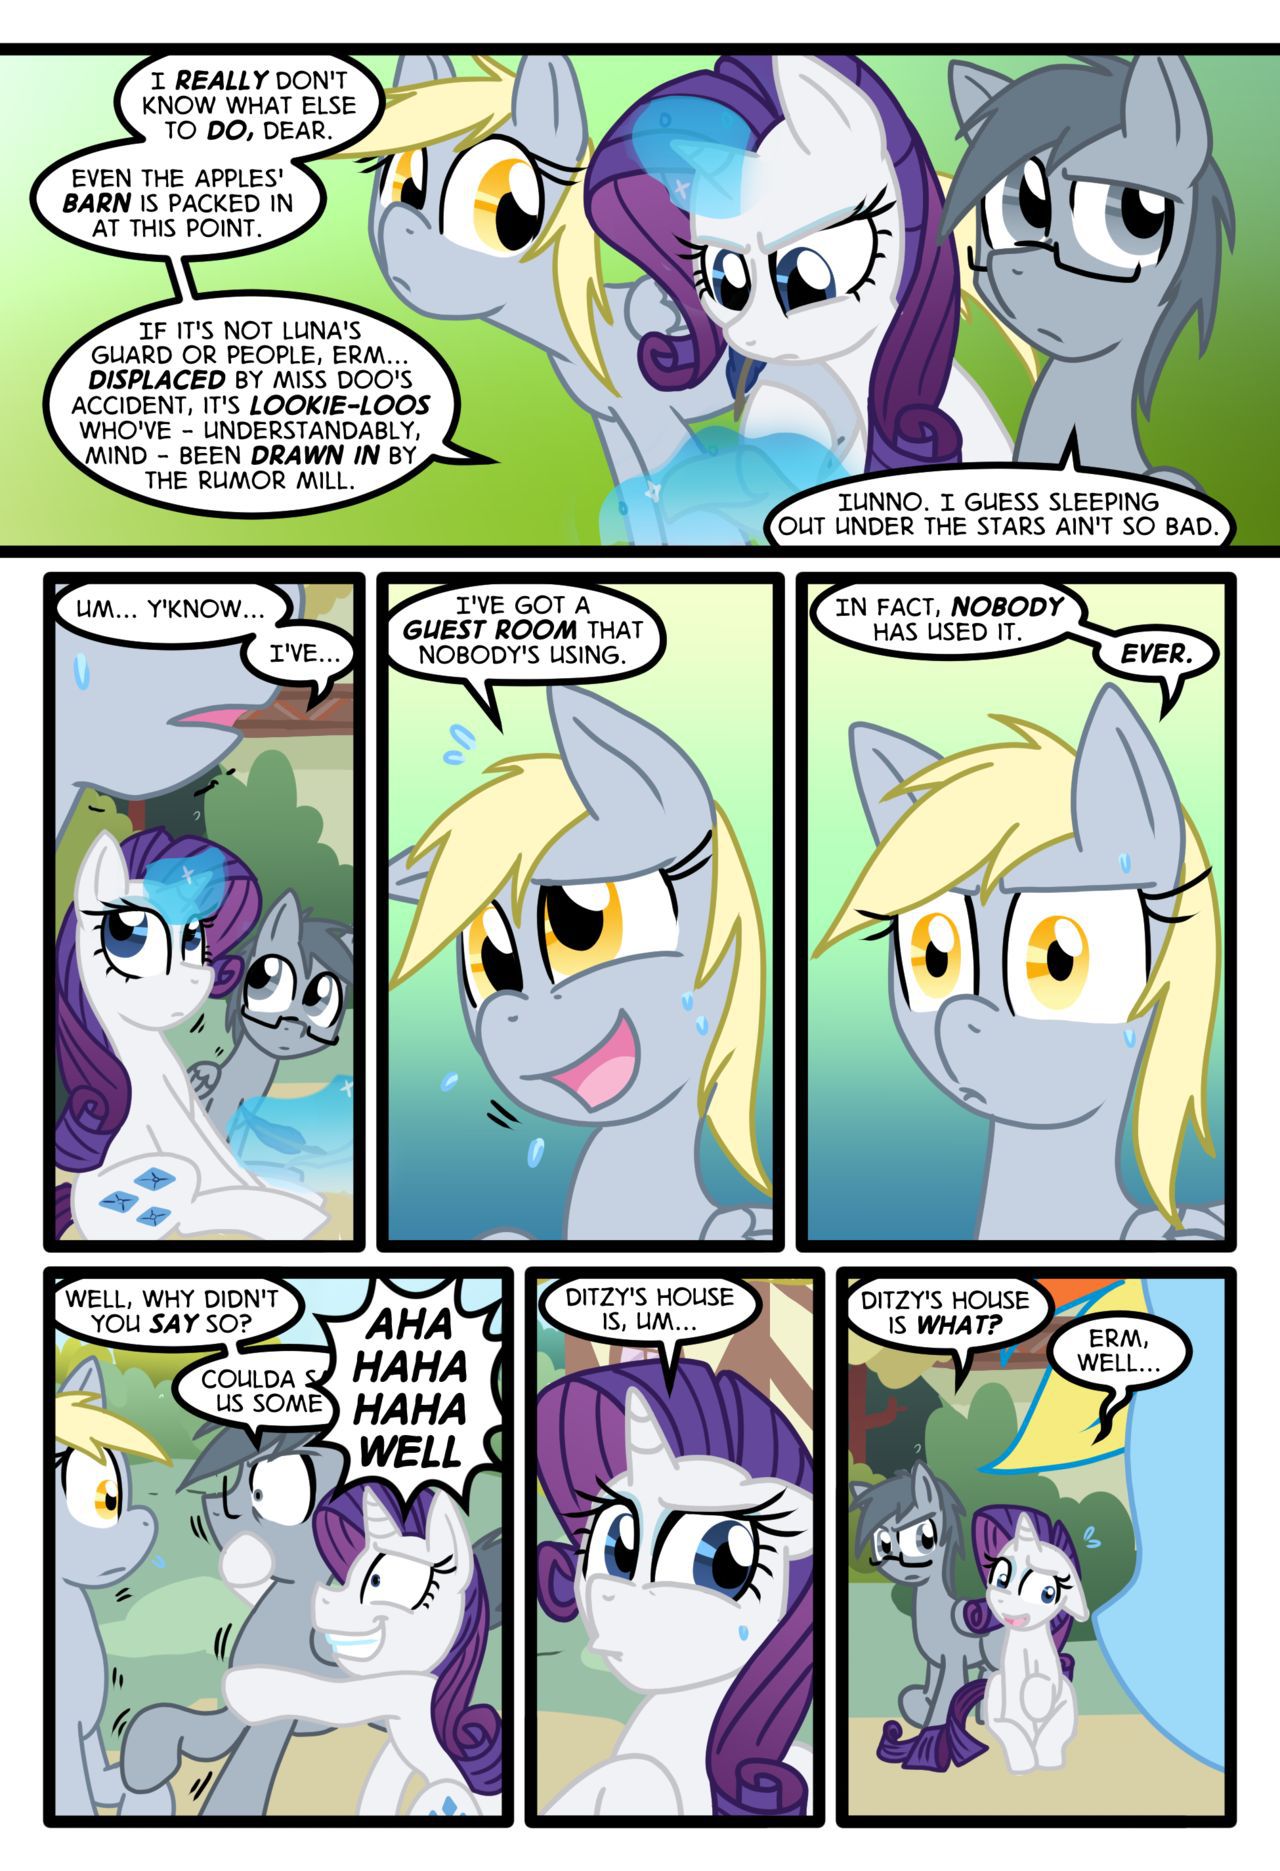 [Zaron] Lonely Hooves (My Little Pony Friendship Is Magic) [Ongoing] 52